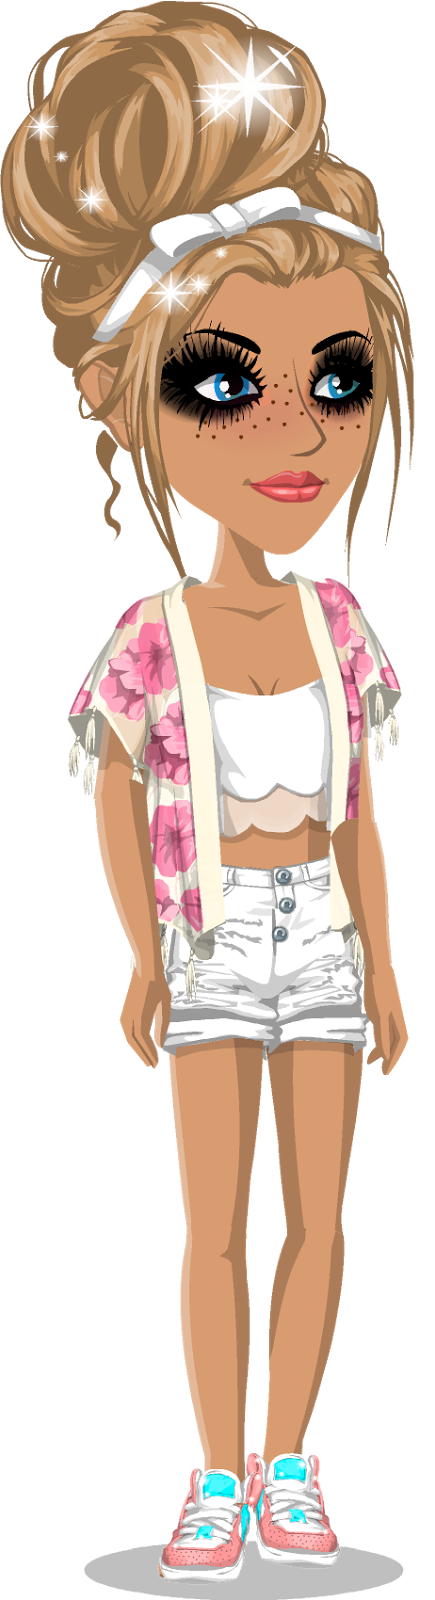 Outfit Ideas Msp Outfit Ideas Non Vip